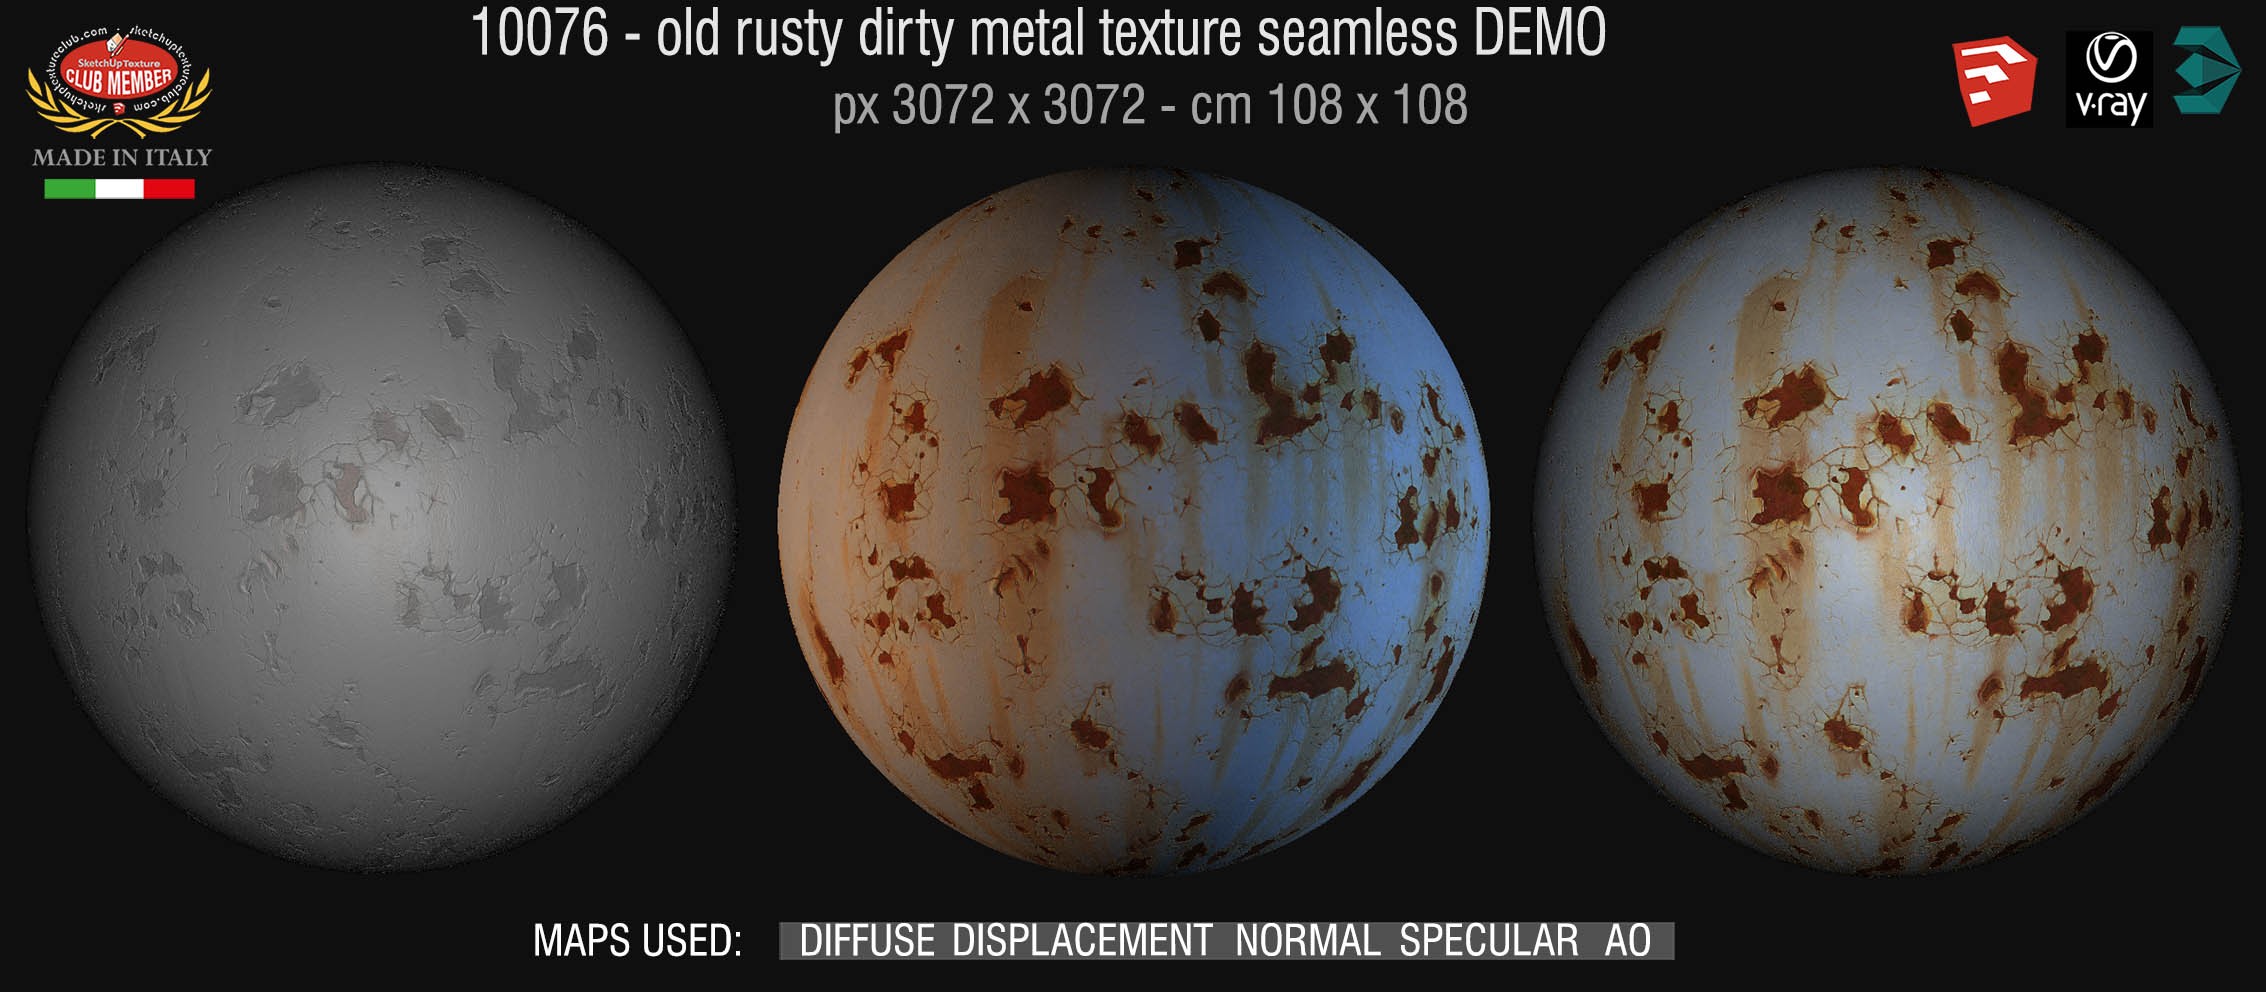 10076 HR Old dirty metal texture seamless + maps DEMO